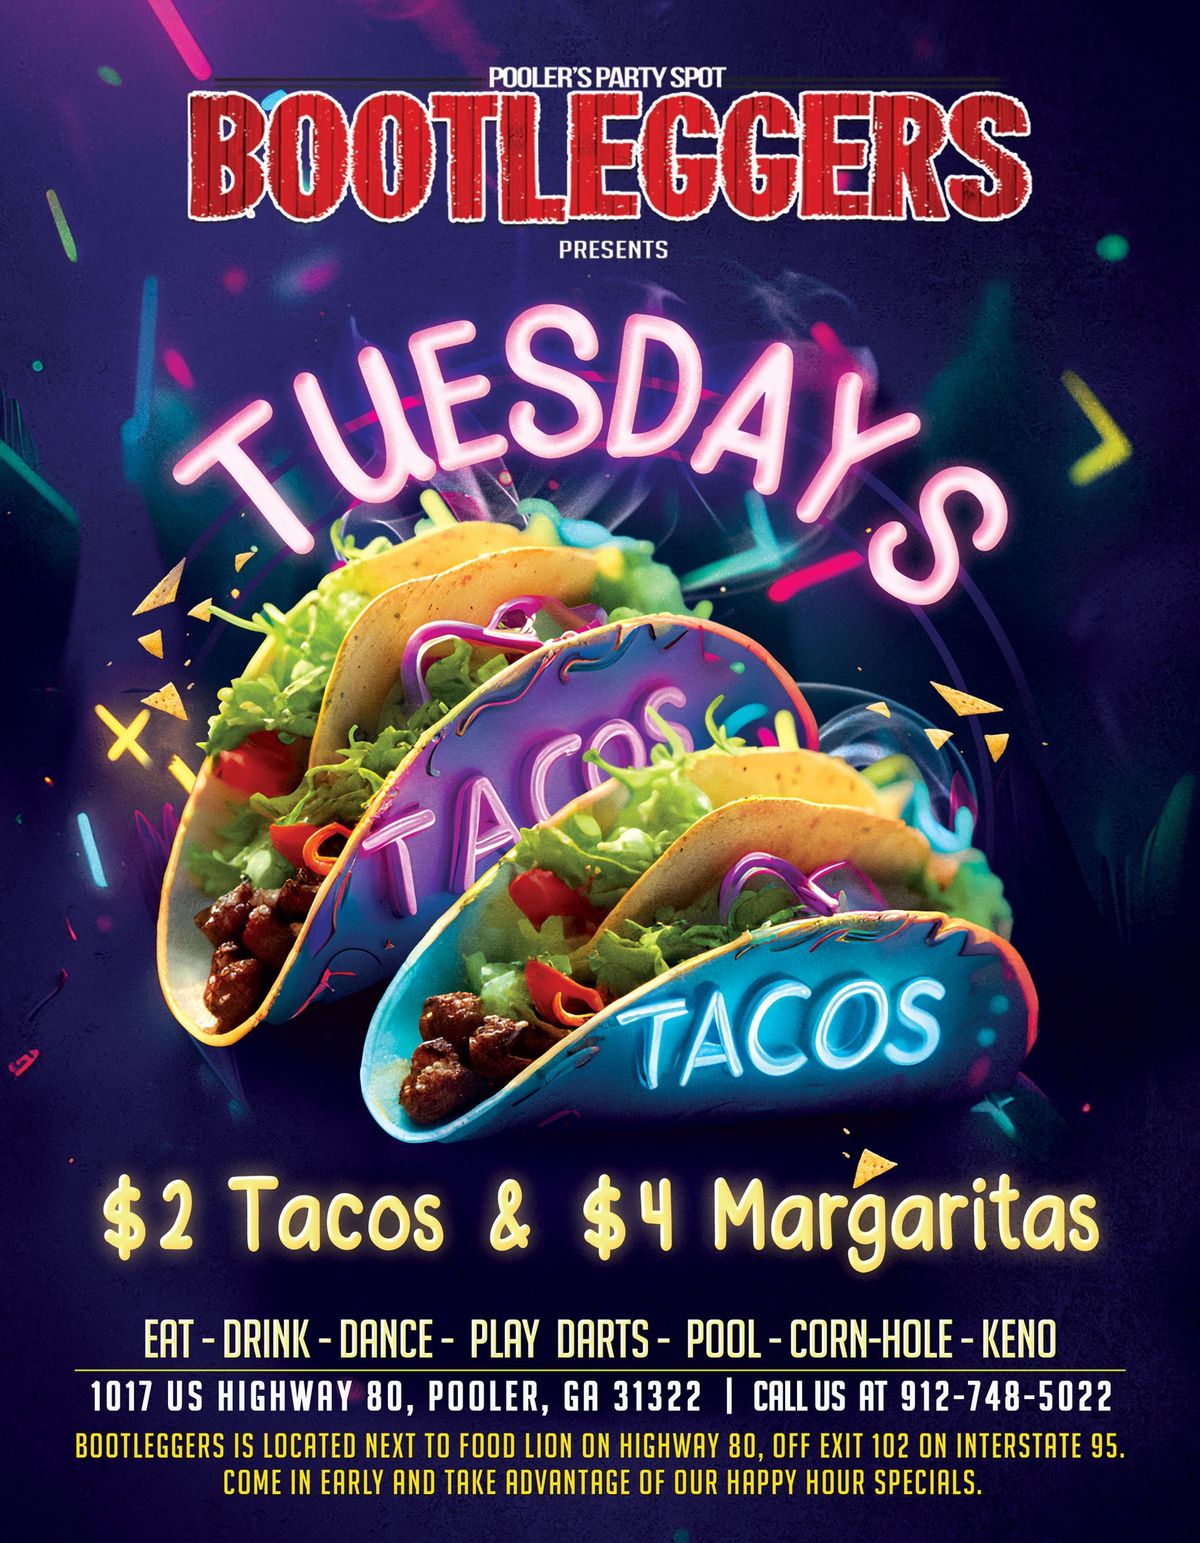 TACO TUESDAYS at BOOTLEGGERS in POOLER